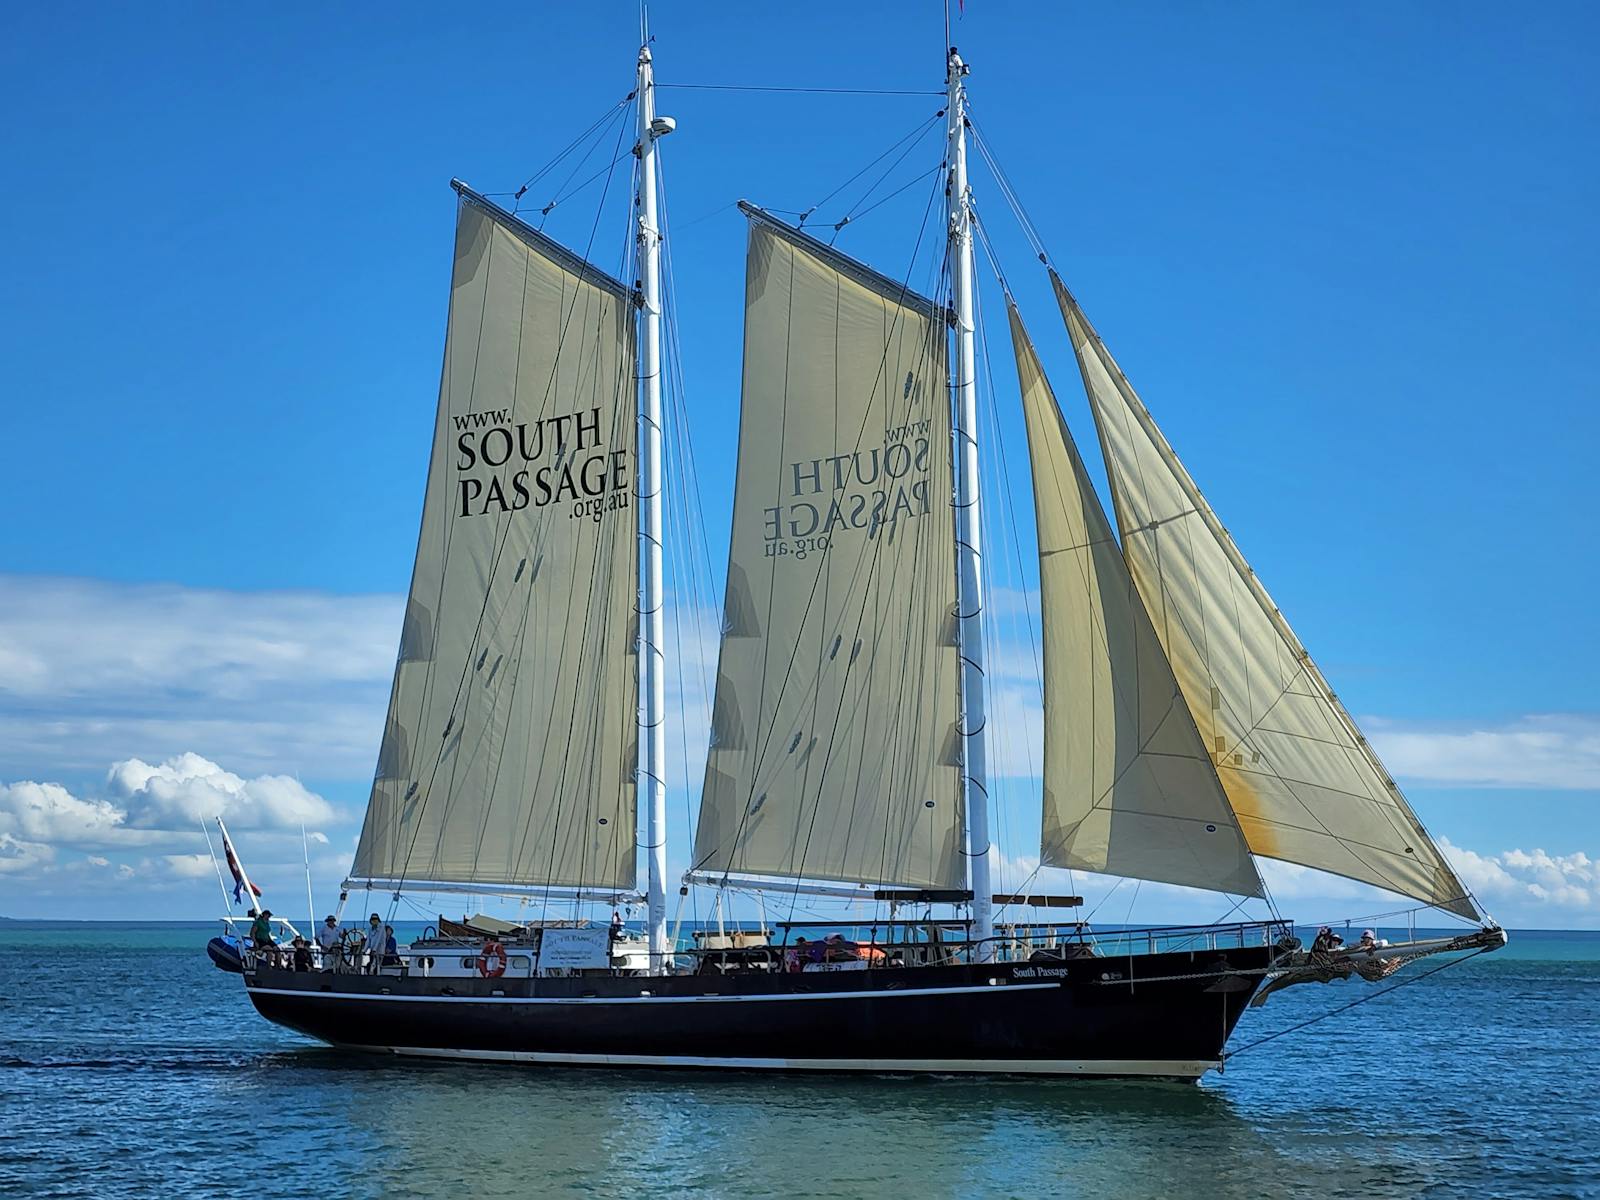 Image for South Passage General Public 4 Day Voyage - Airlie Beach - Townsville